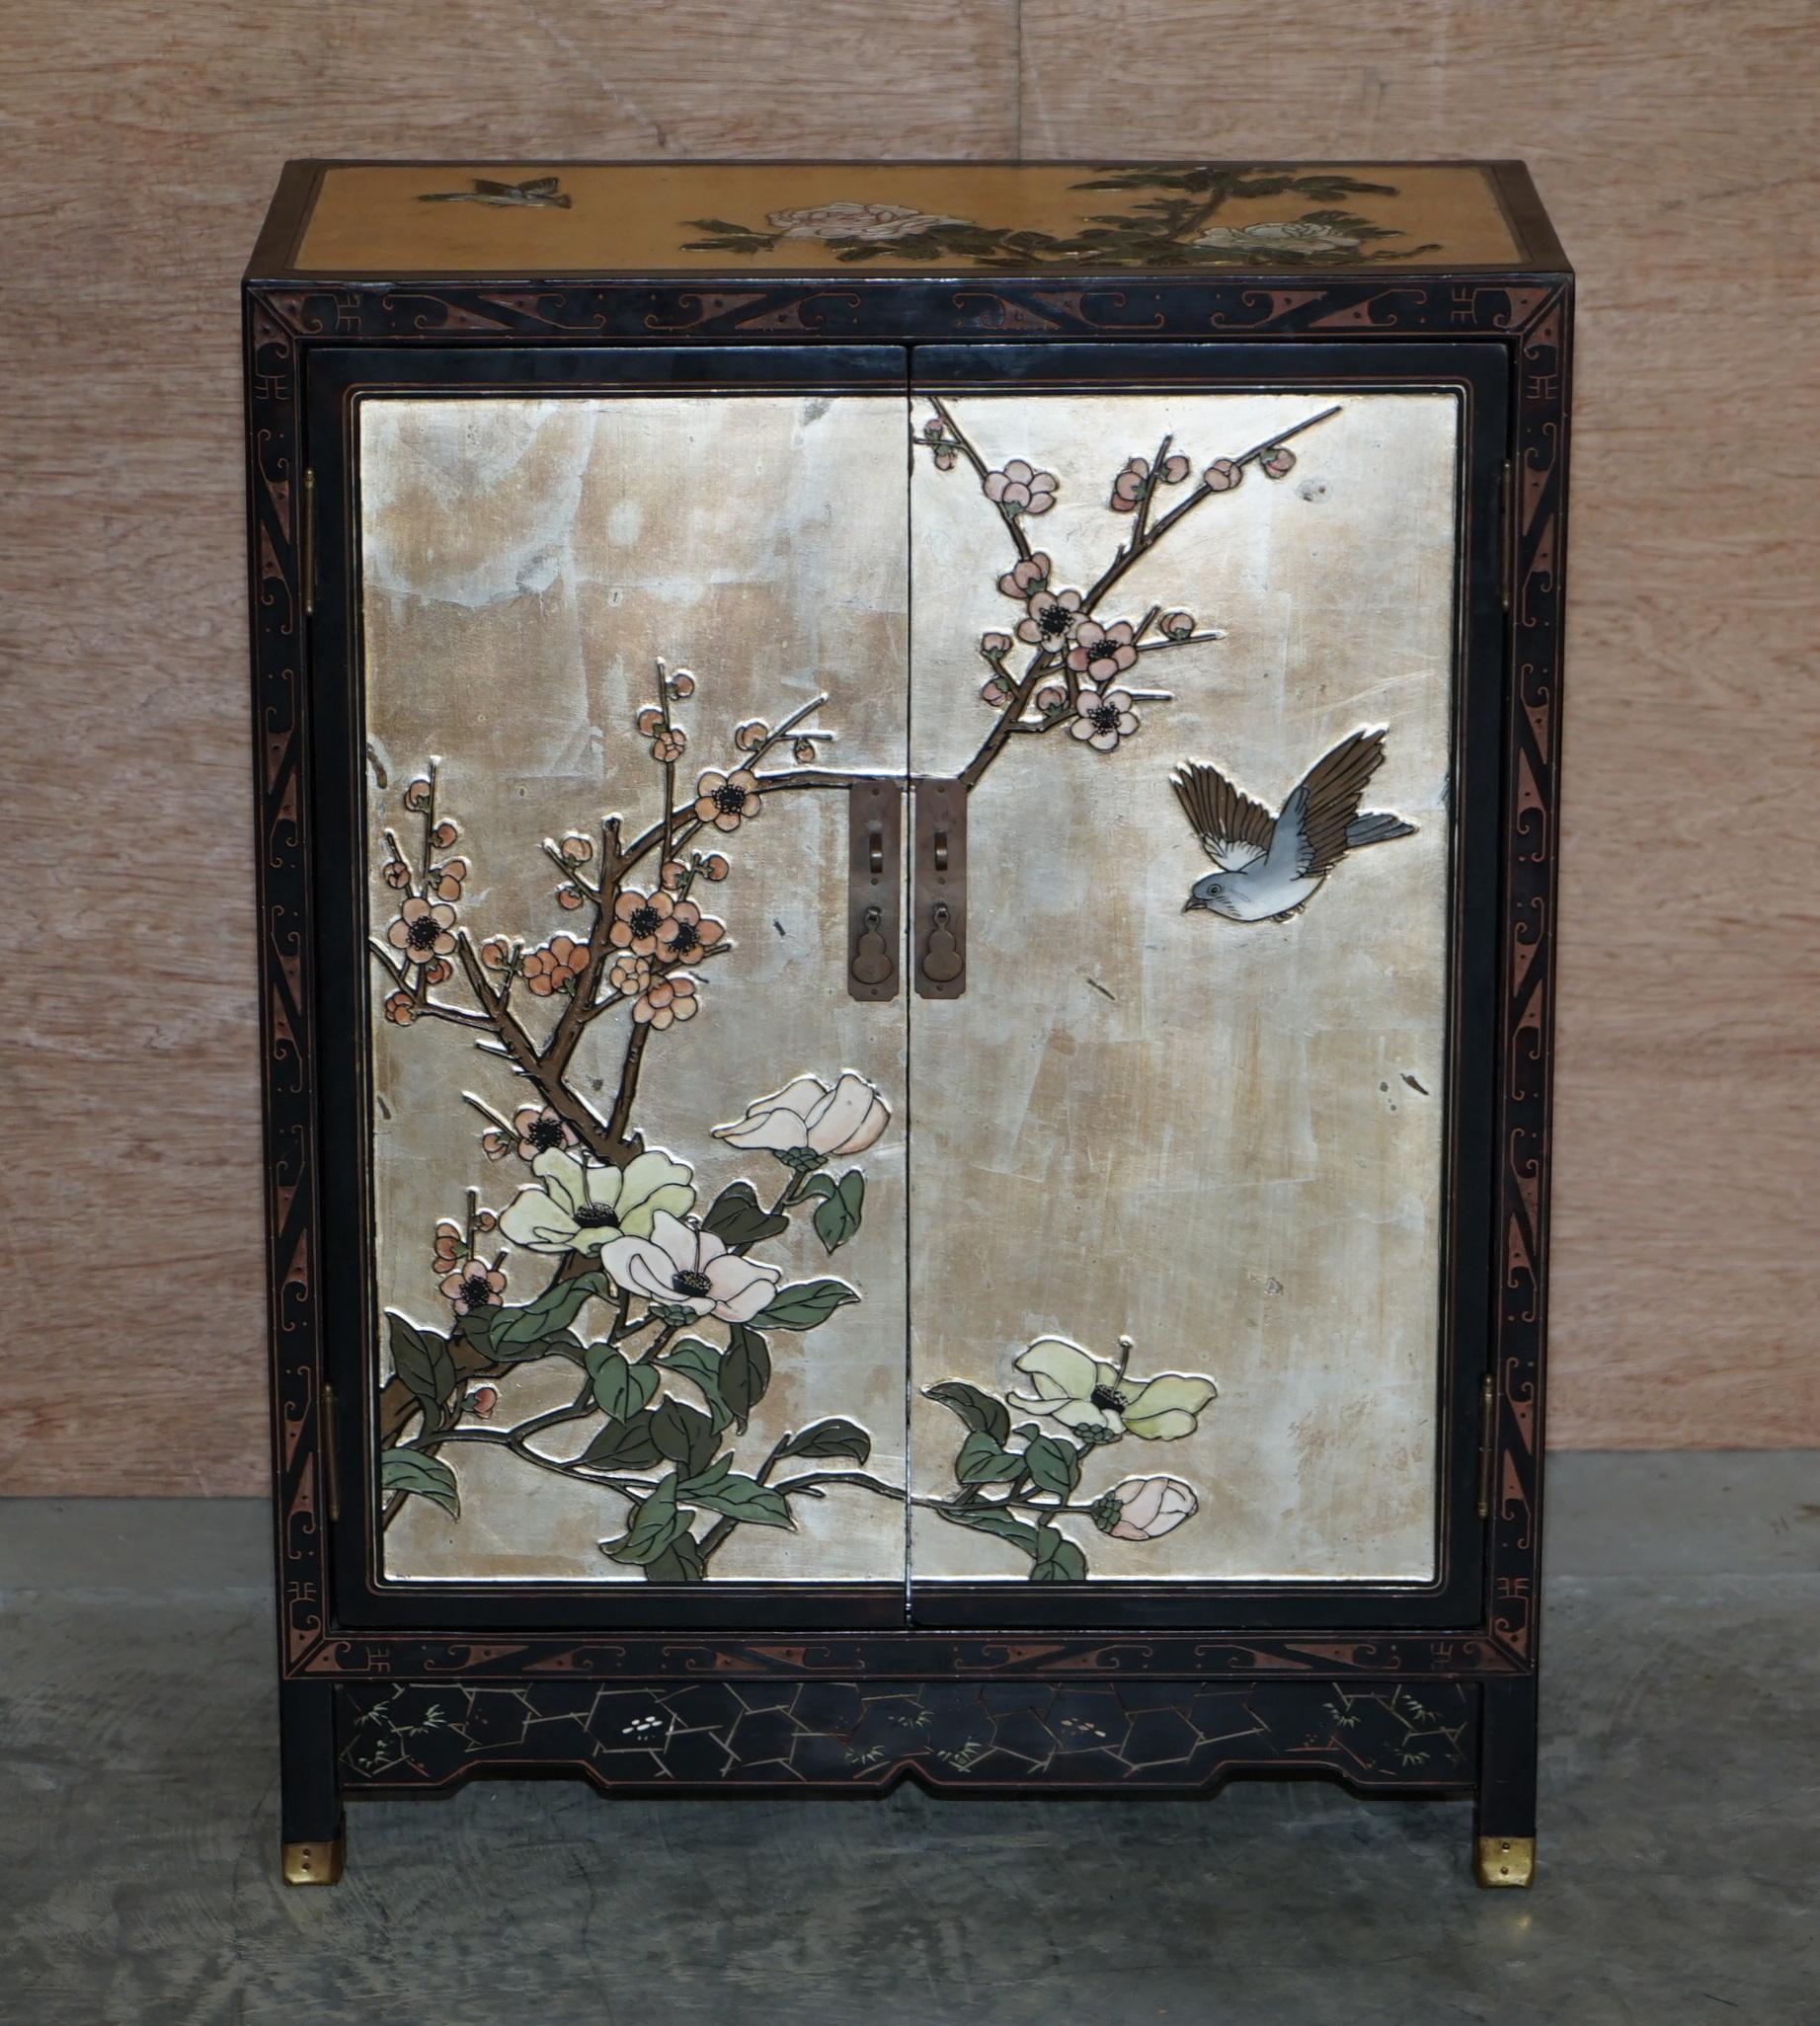 We are delighted to offer for sale this beautiful ornately decorated Chinese Chinoiserie side board cupboard hand painted with birds and flowers

A very well made and decorative side table, it has cupboards and drawers which offer plenty of